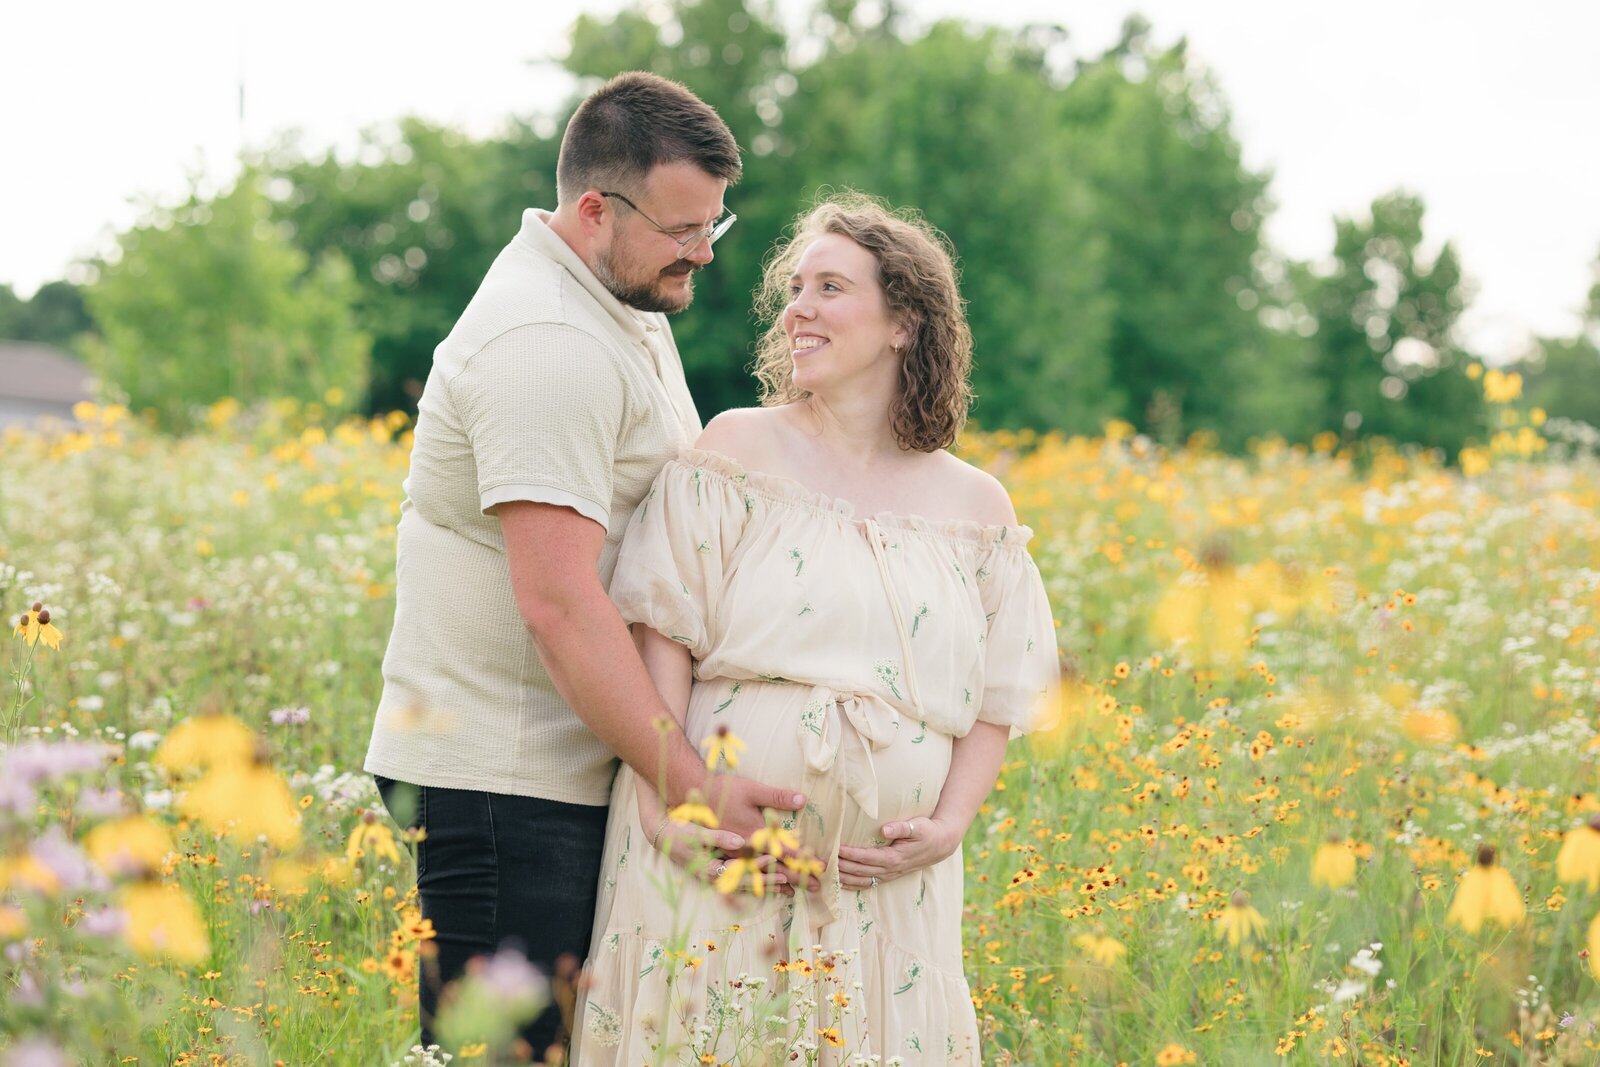 Portrait of an expecting couple in a field of wildflowers taken by louisville maternity photographer missy marshall